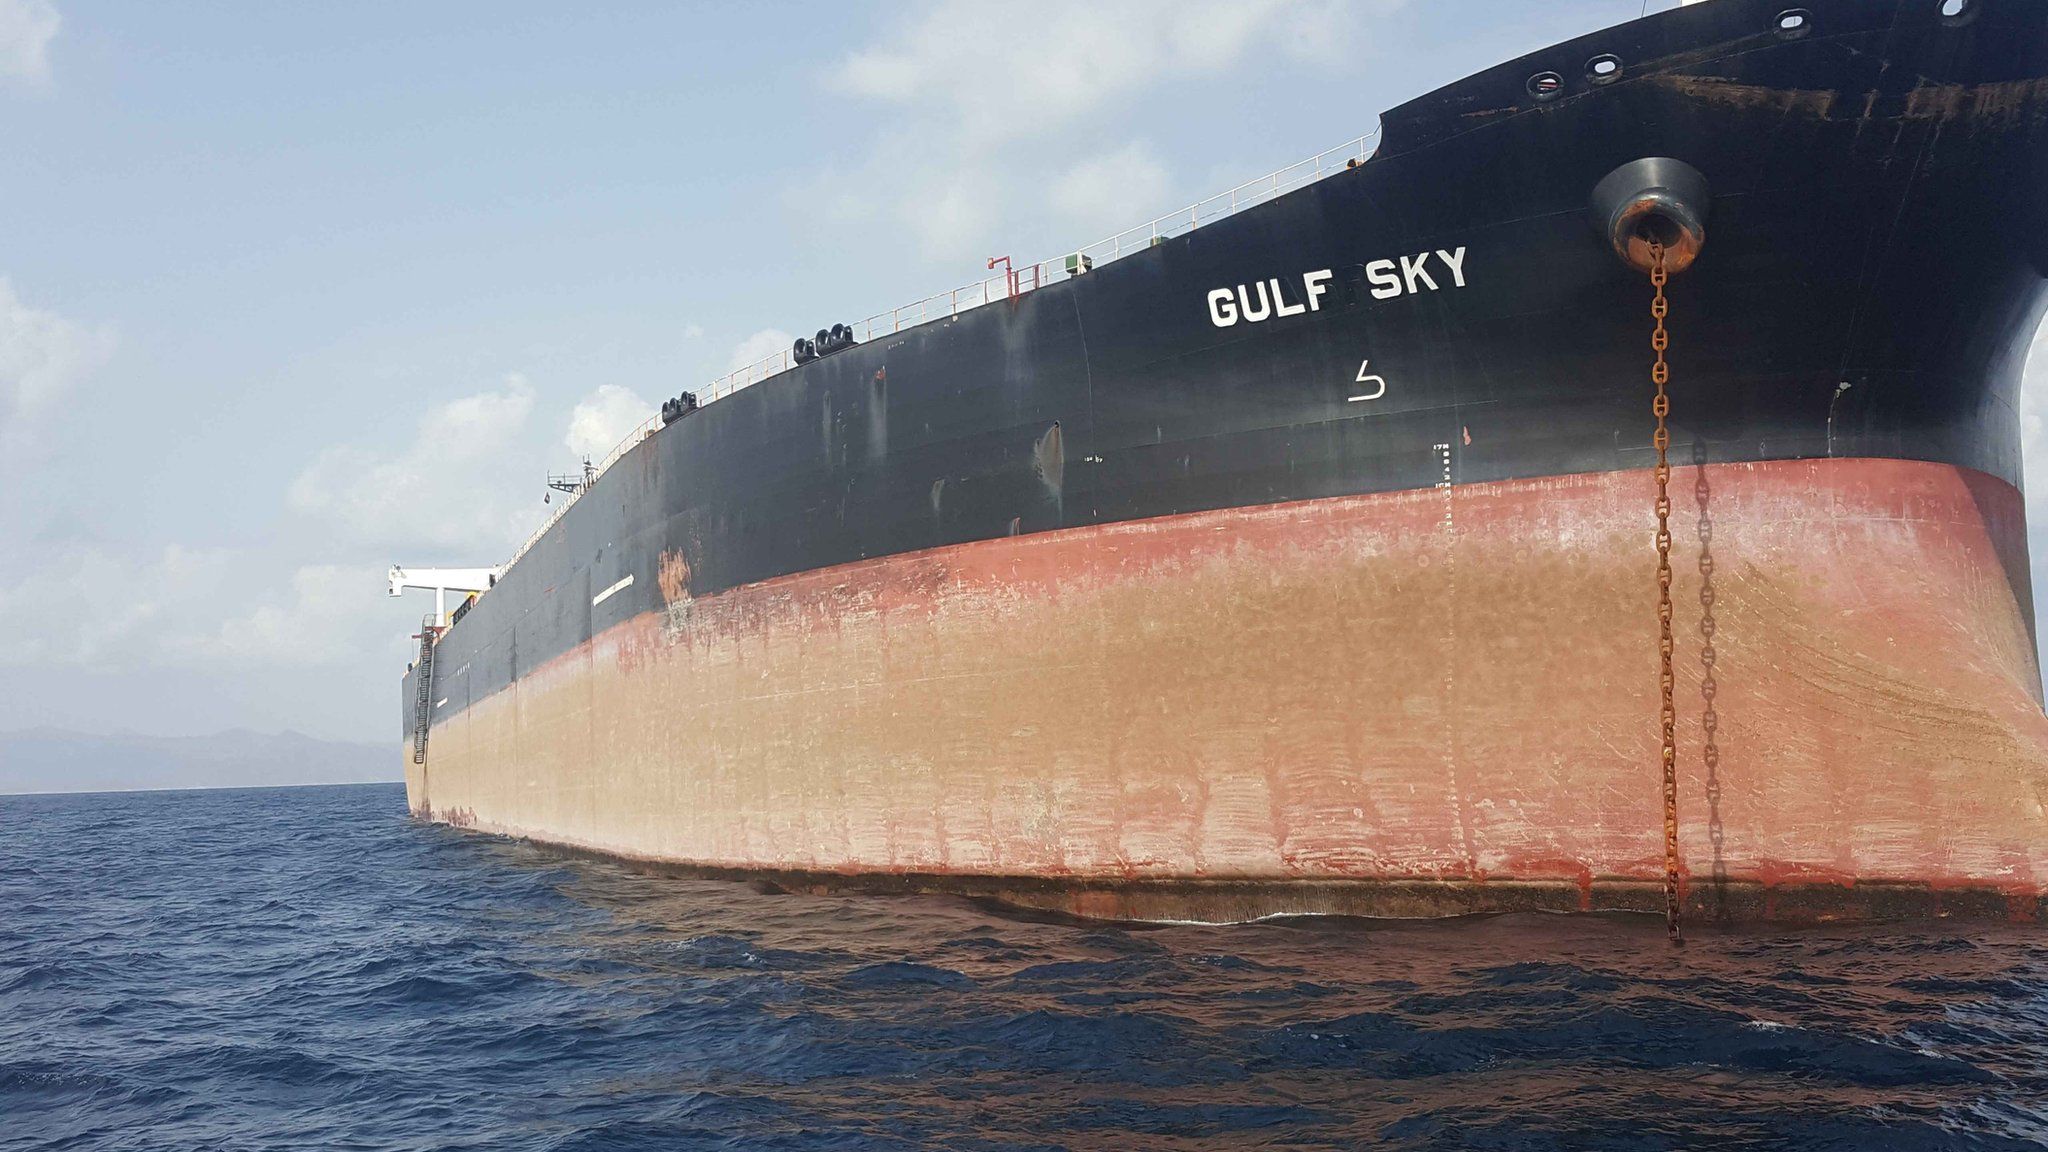 Picture of Gulf Sky ship